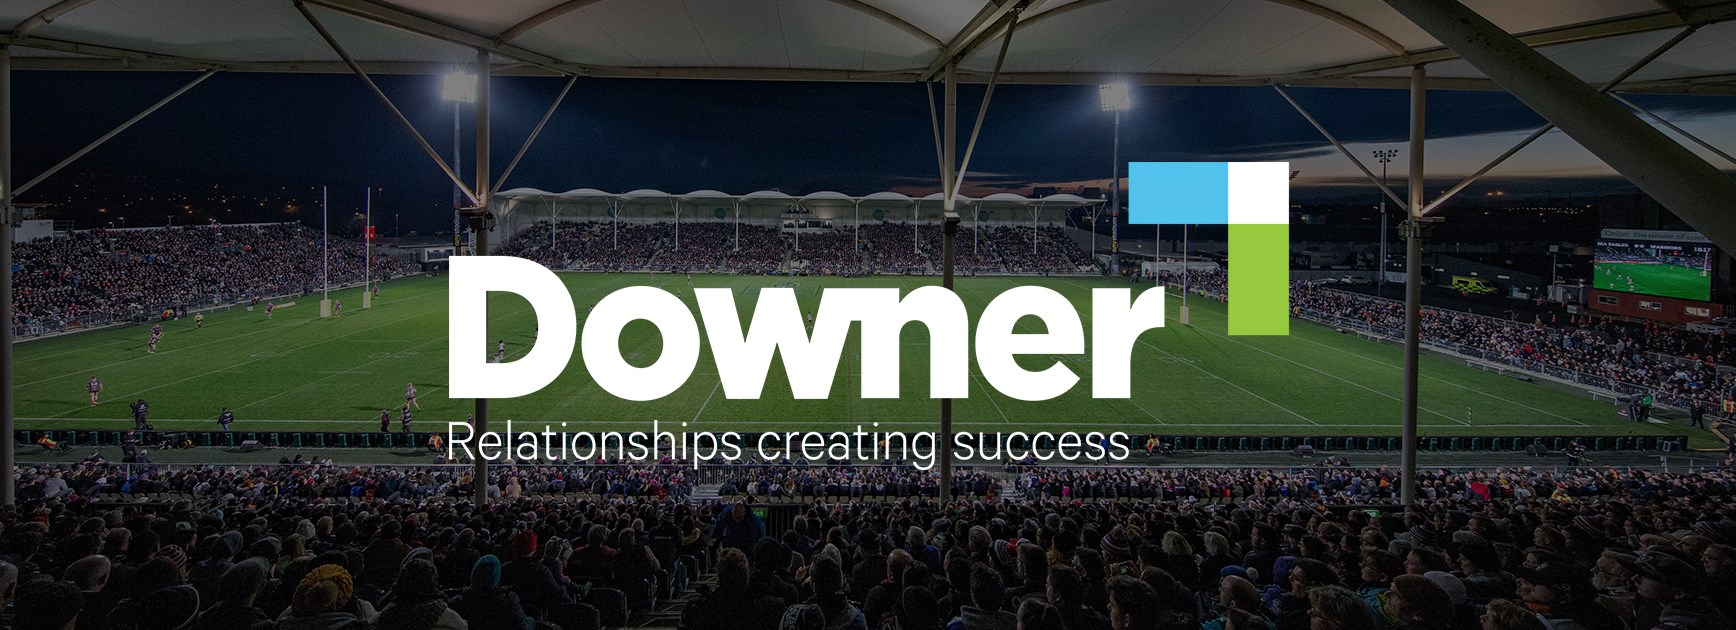 Downer becomes Presenting Partner of Christchurch ‘home’ game